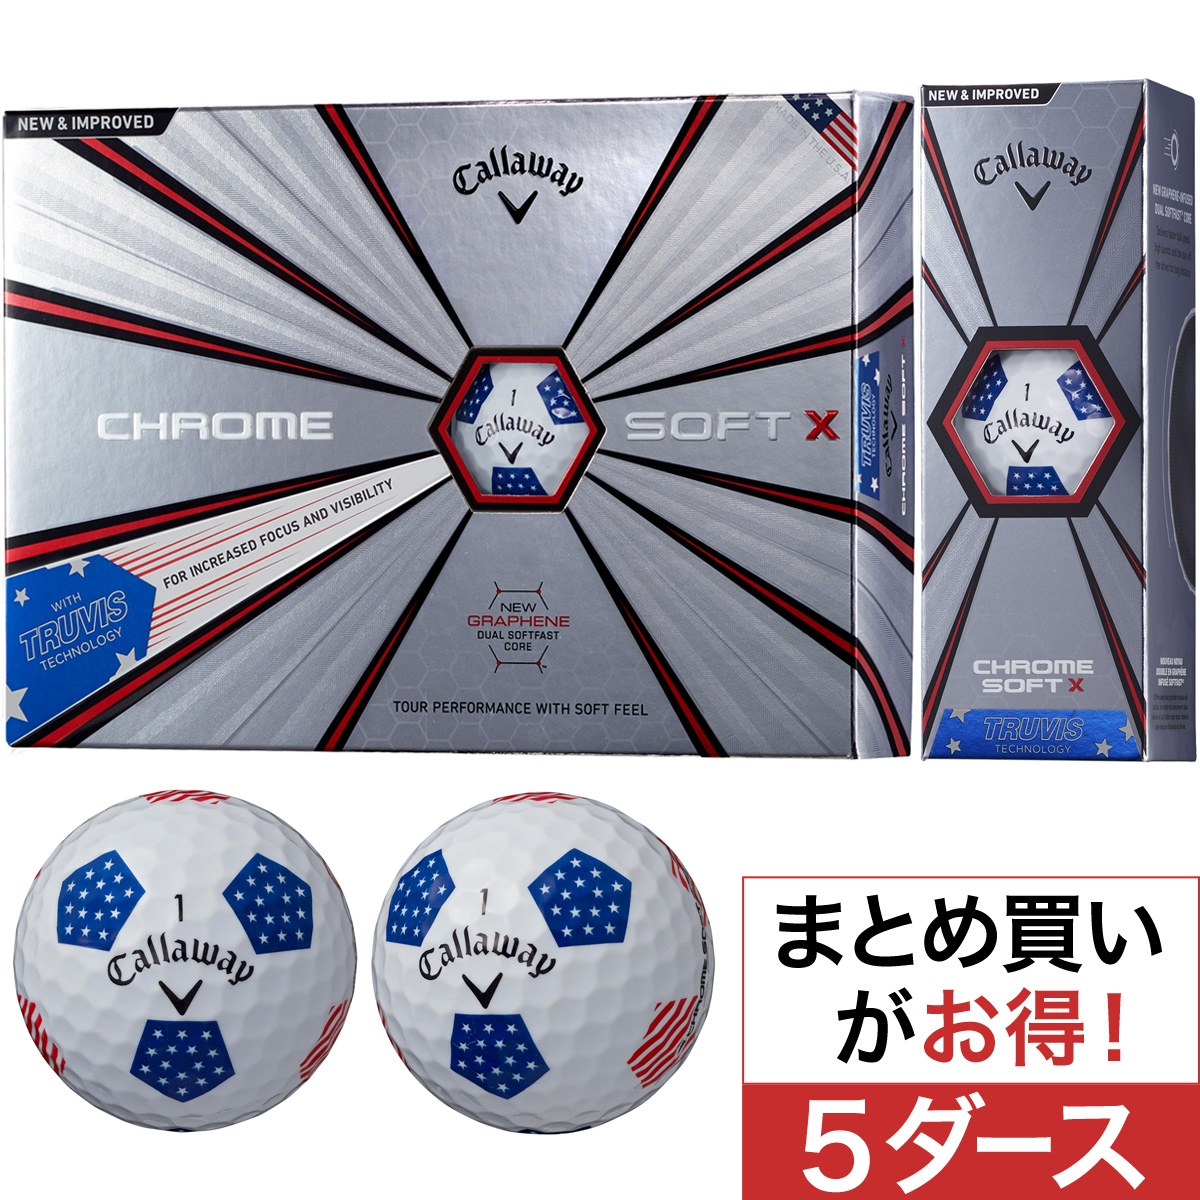  CHROME SOFT X 18 TRUVIS ボール 5ダースセット 